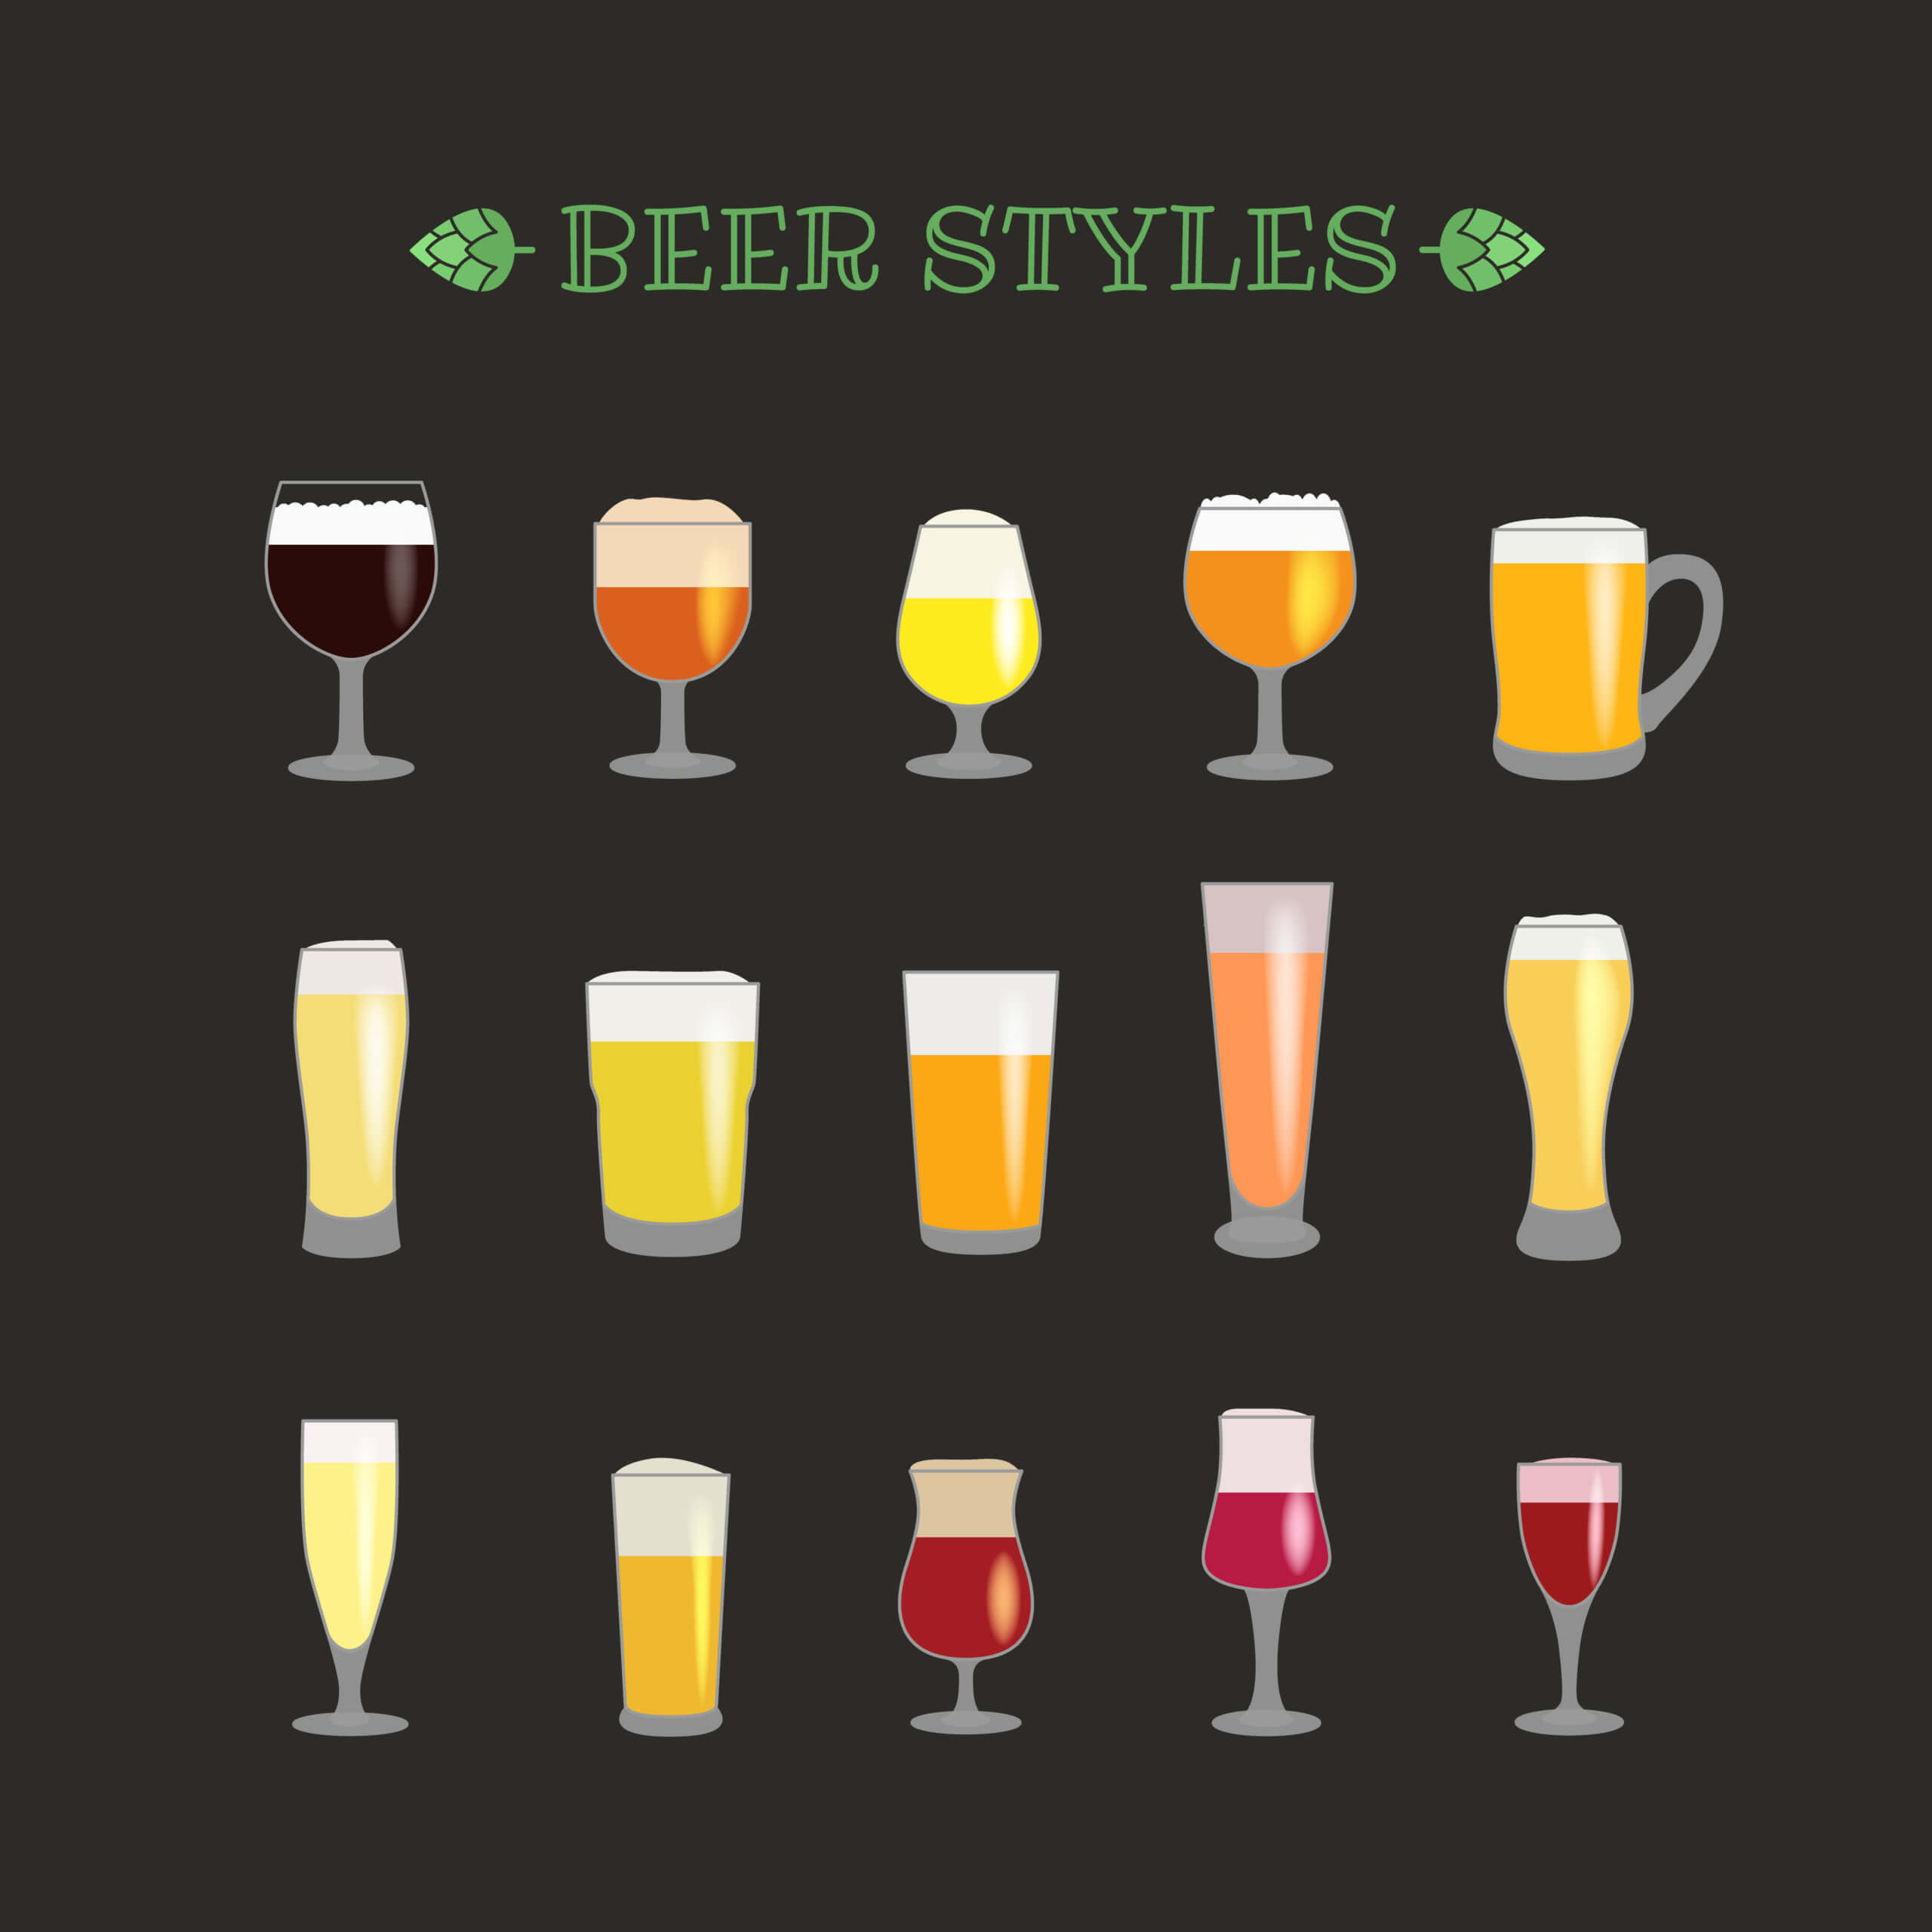 Beer and Glassware: Does it Matter?